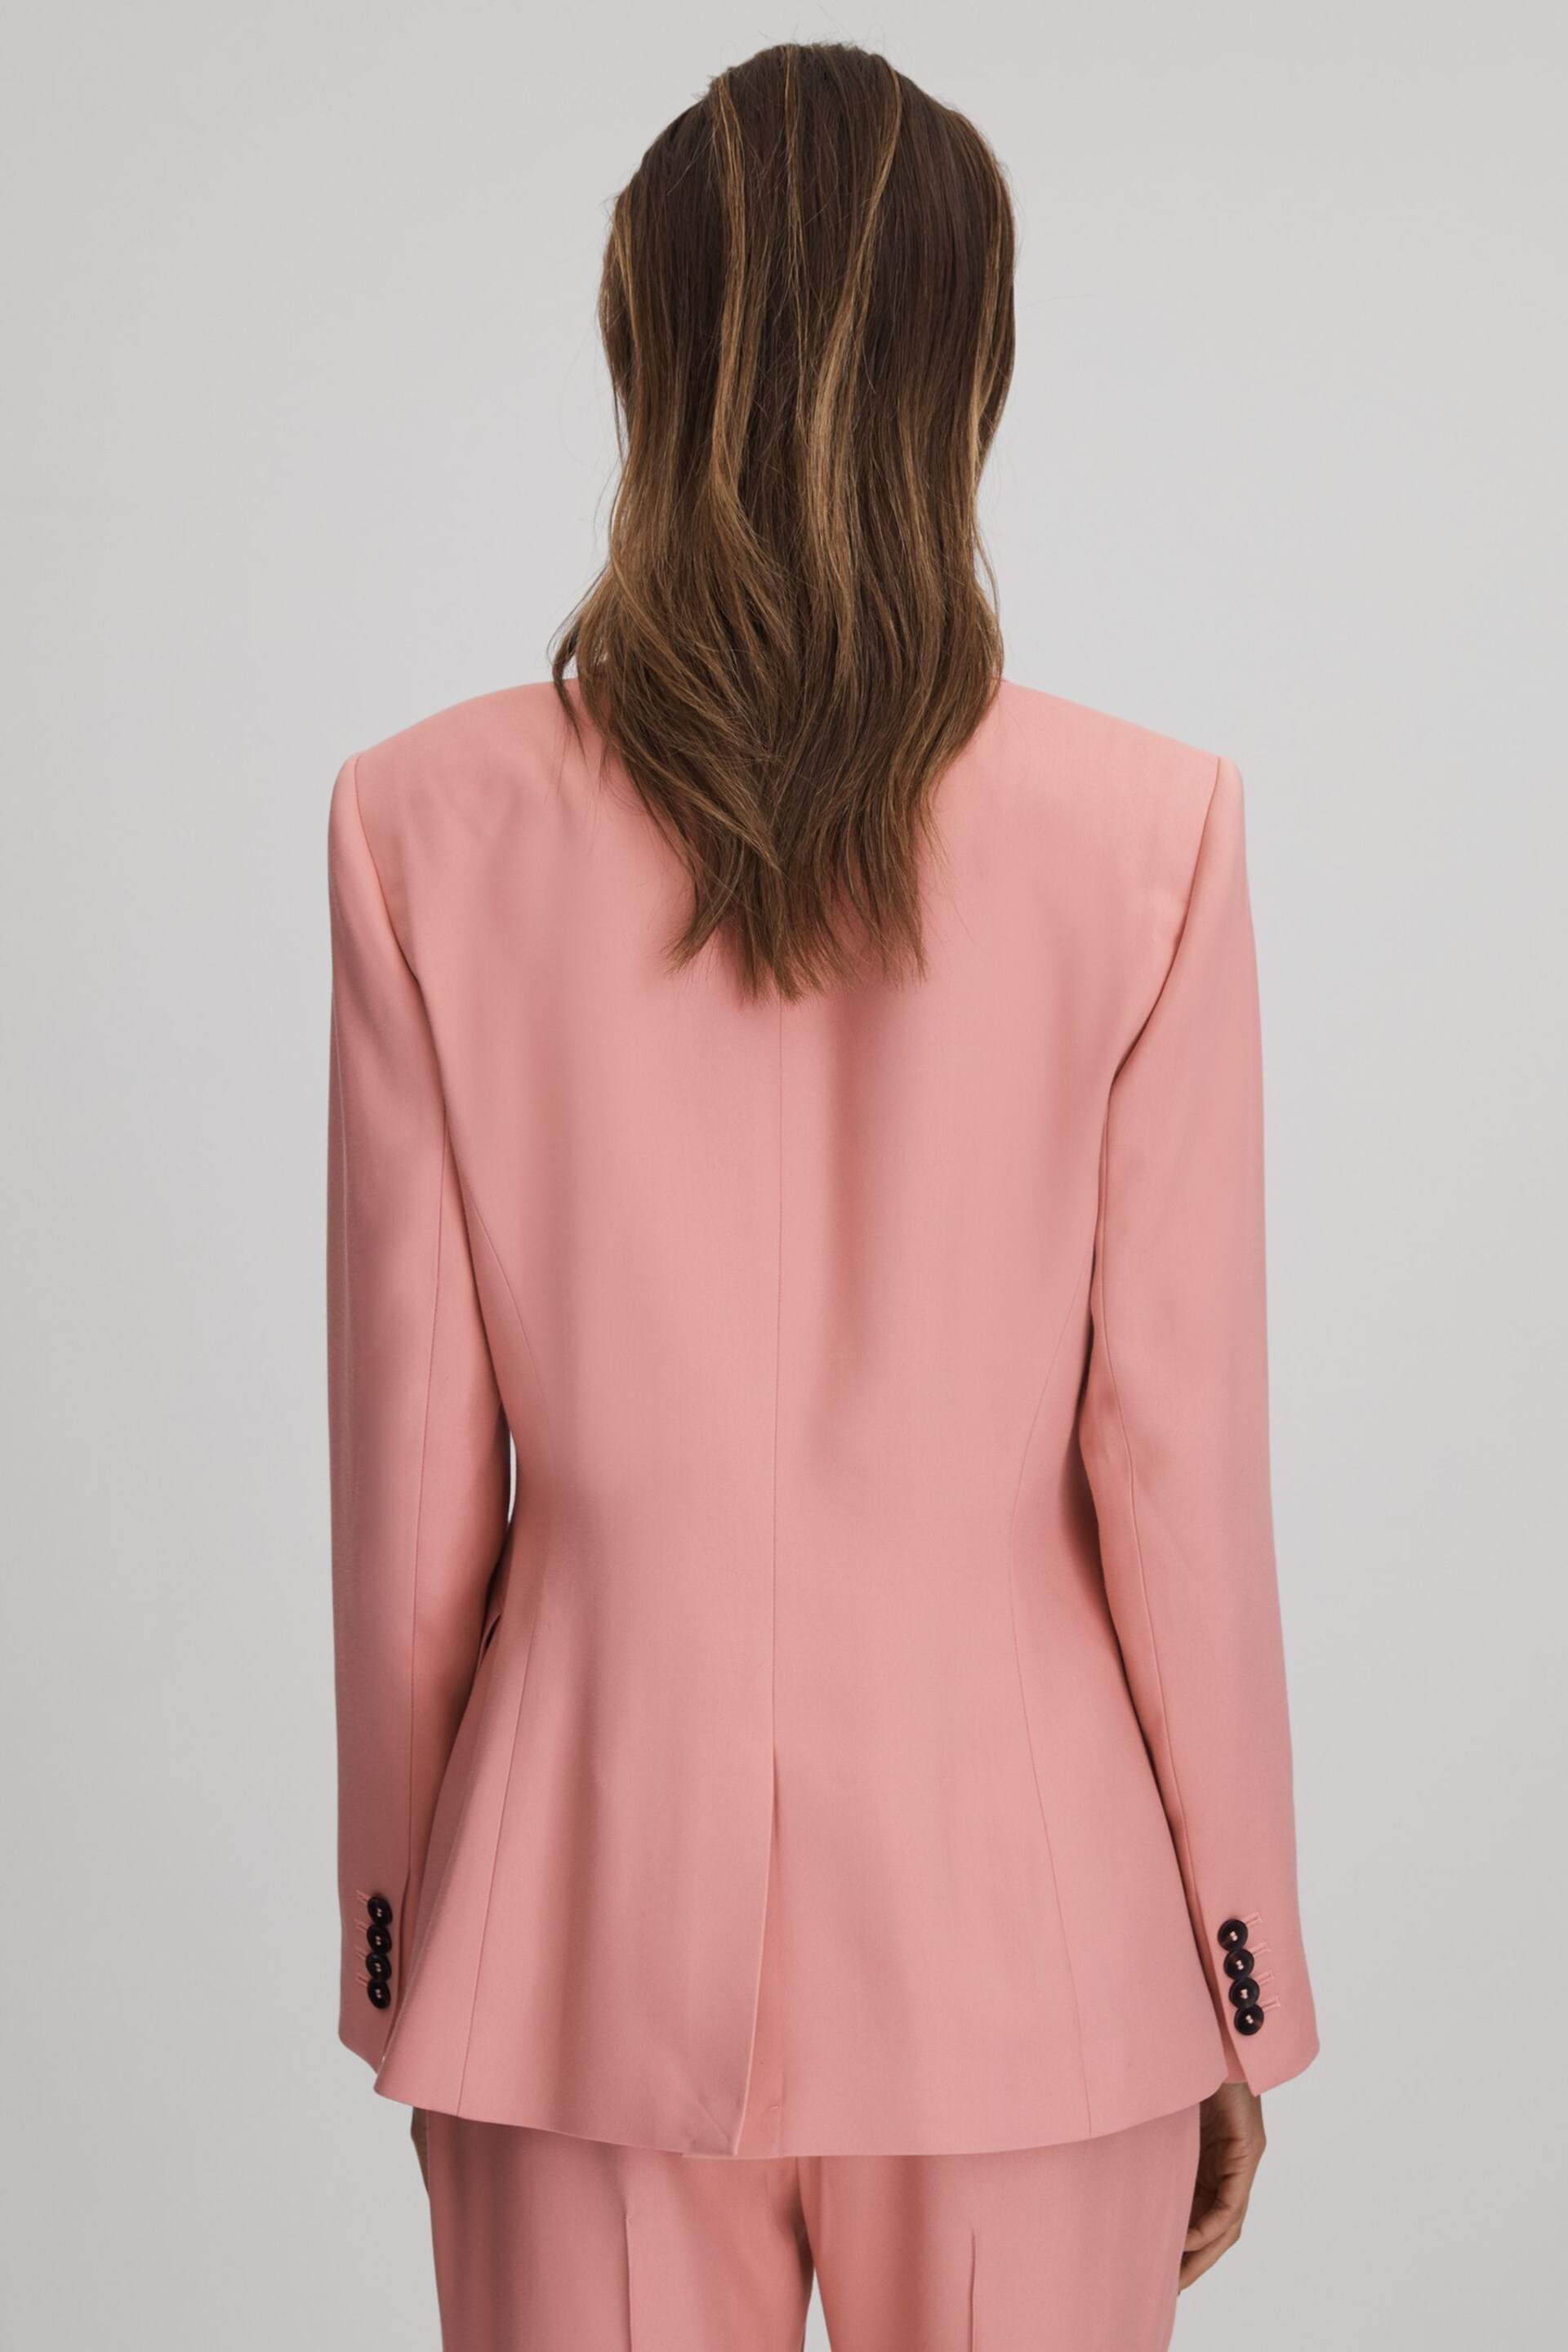 Reiss Pink Millie Petite Tailored Single Breasted Suit Blazer - Image 5 of 8